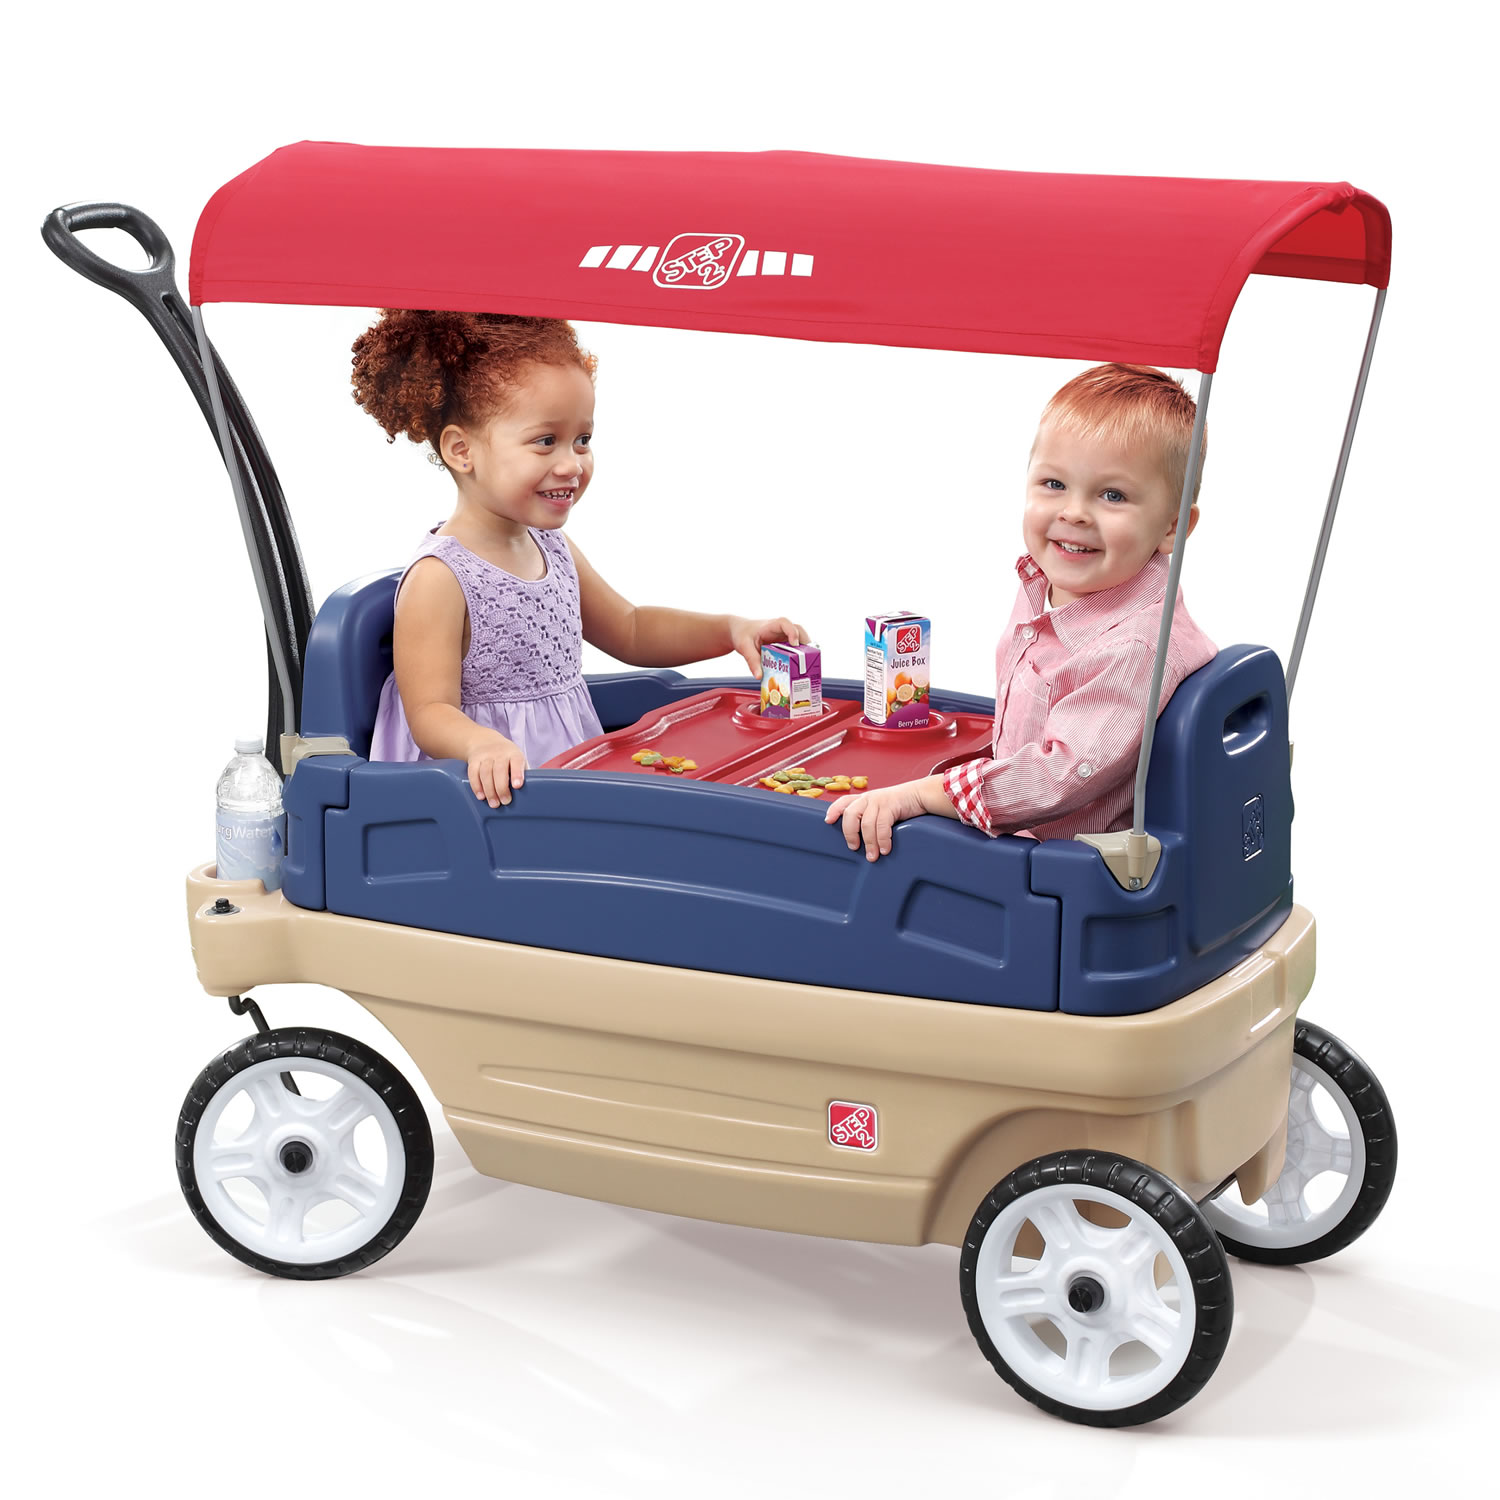 Step2 Whisper Ride Touring Wagon Plastic Canopy Wagon for Kids - image 1 of 6